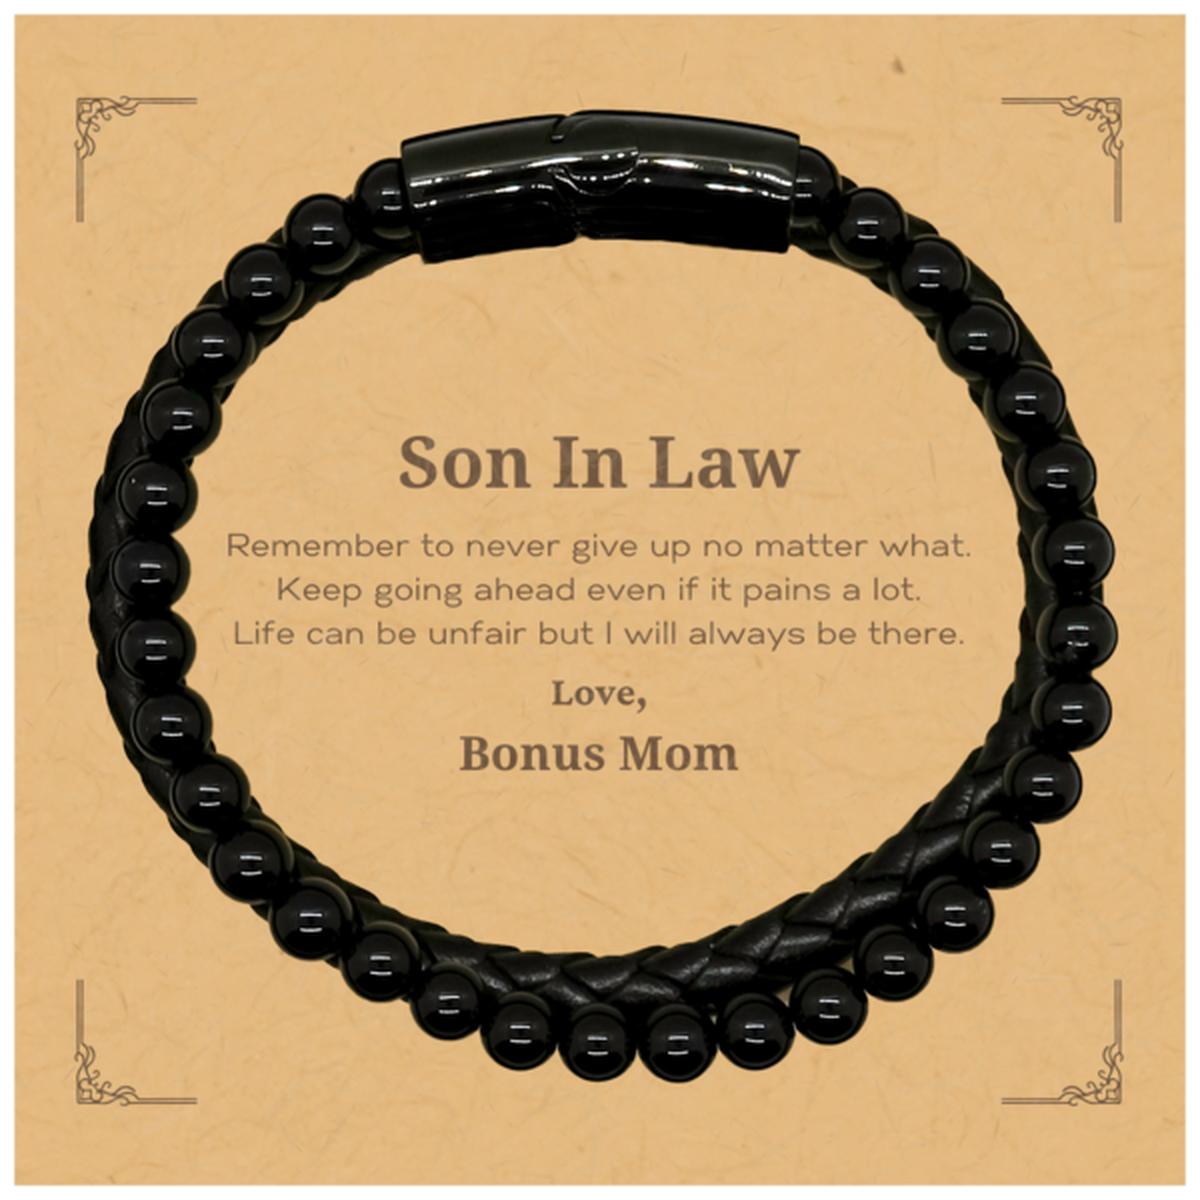 Son In Law Motivational Gifts from Bonus Mom, Remember to never give up no matter what, Inspirational Birthday Stone Leather Bracelets for Son In Law